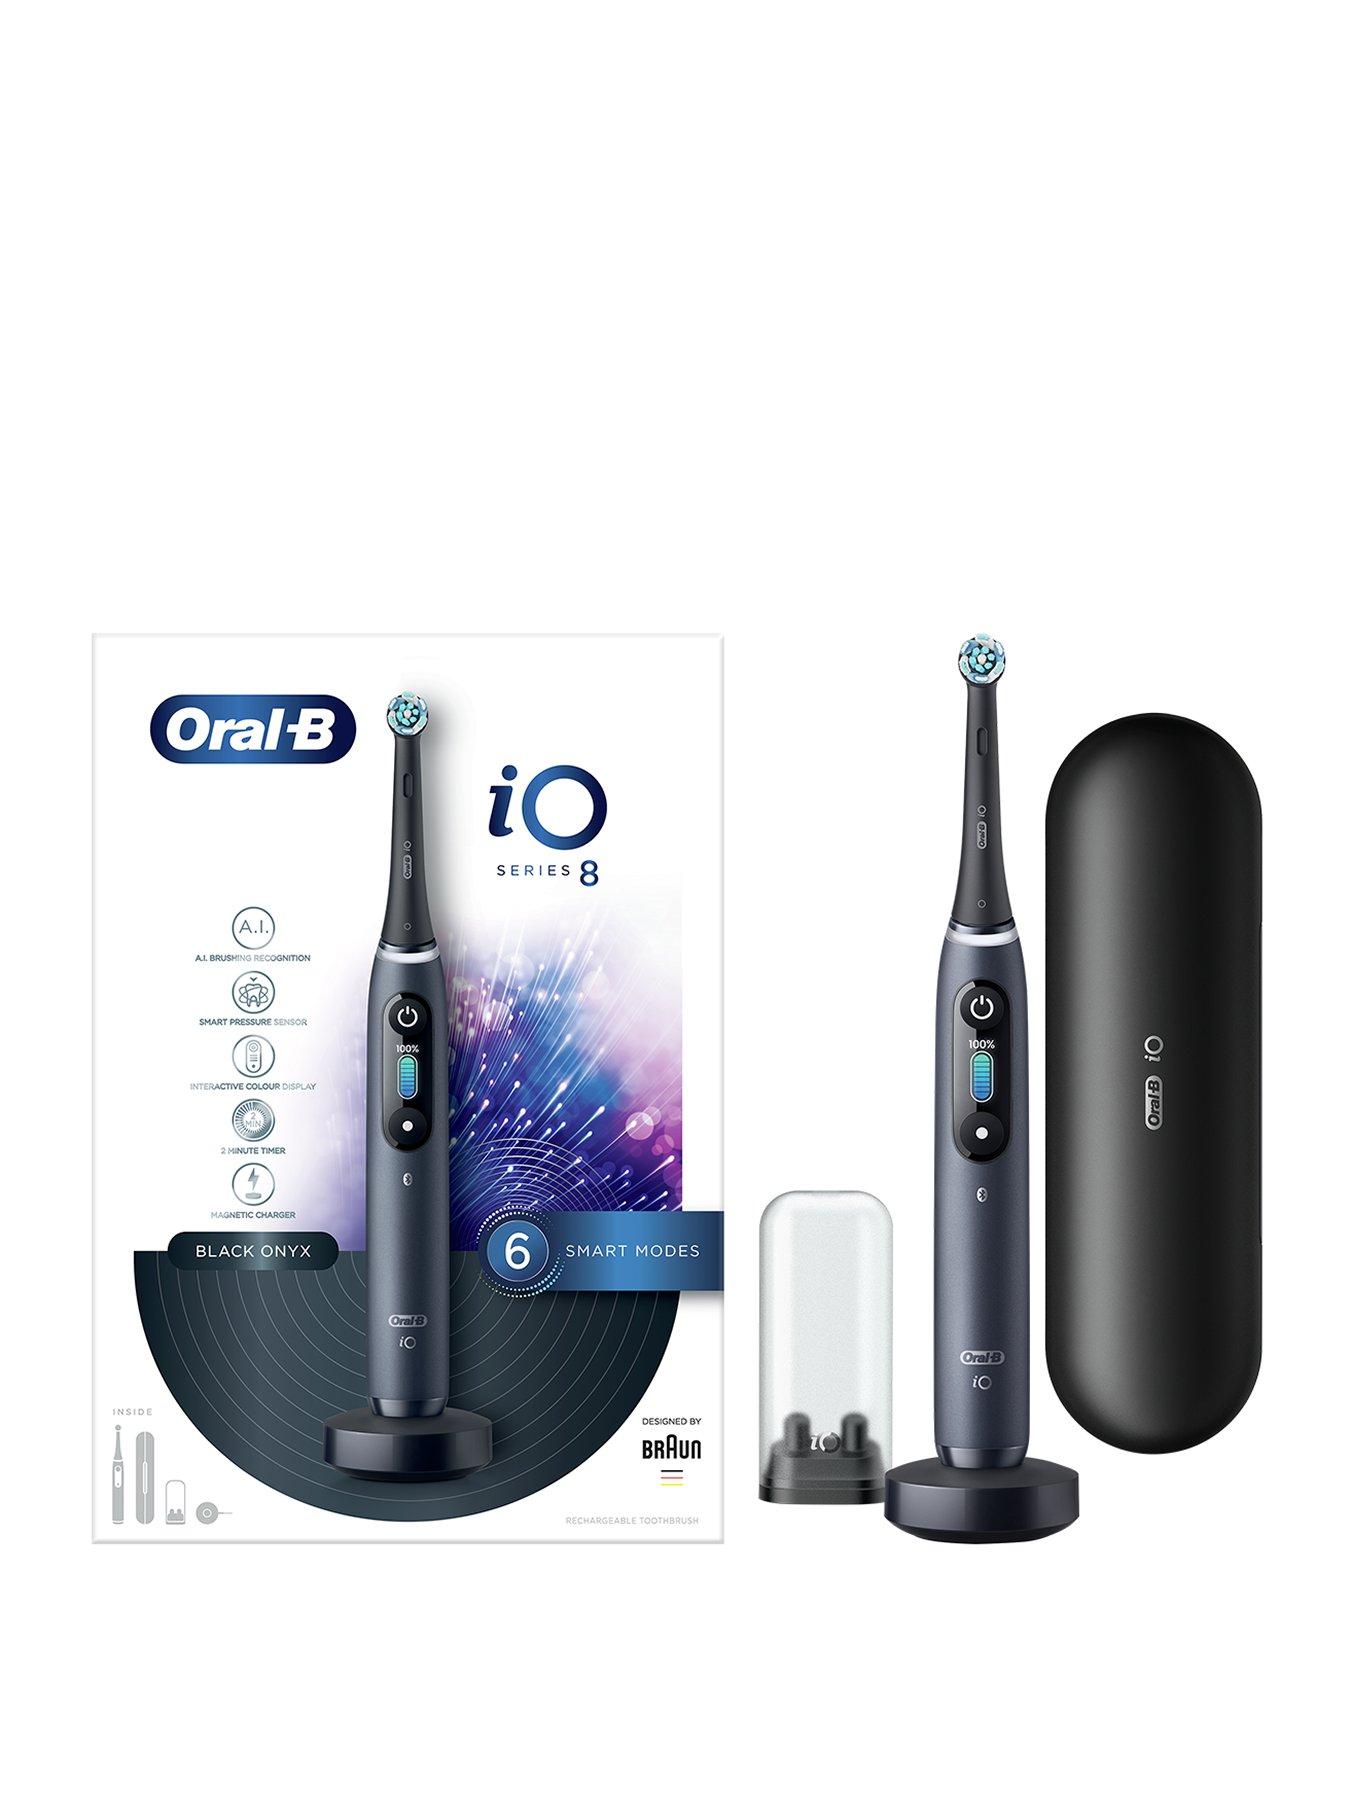 Black Electric Toothbrush - Rechargeable